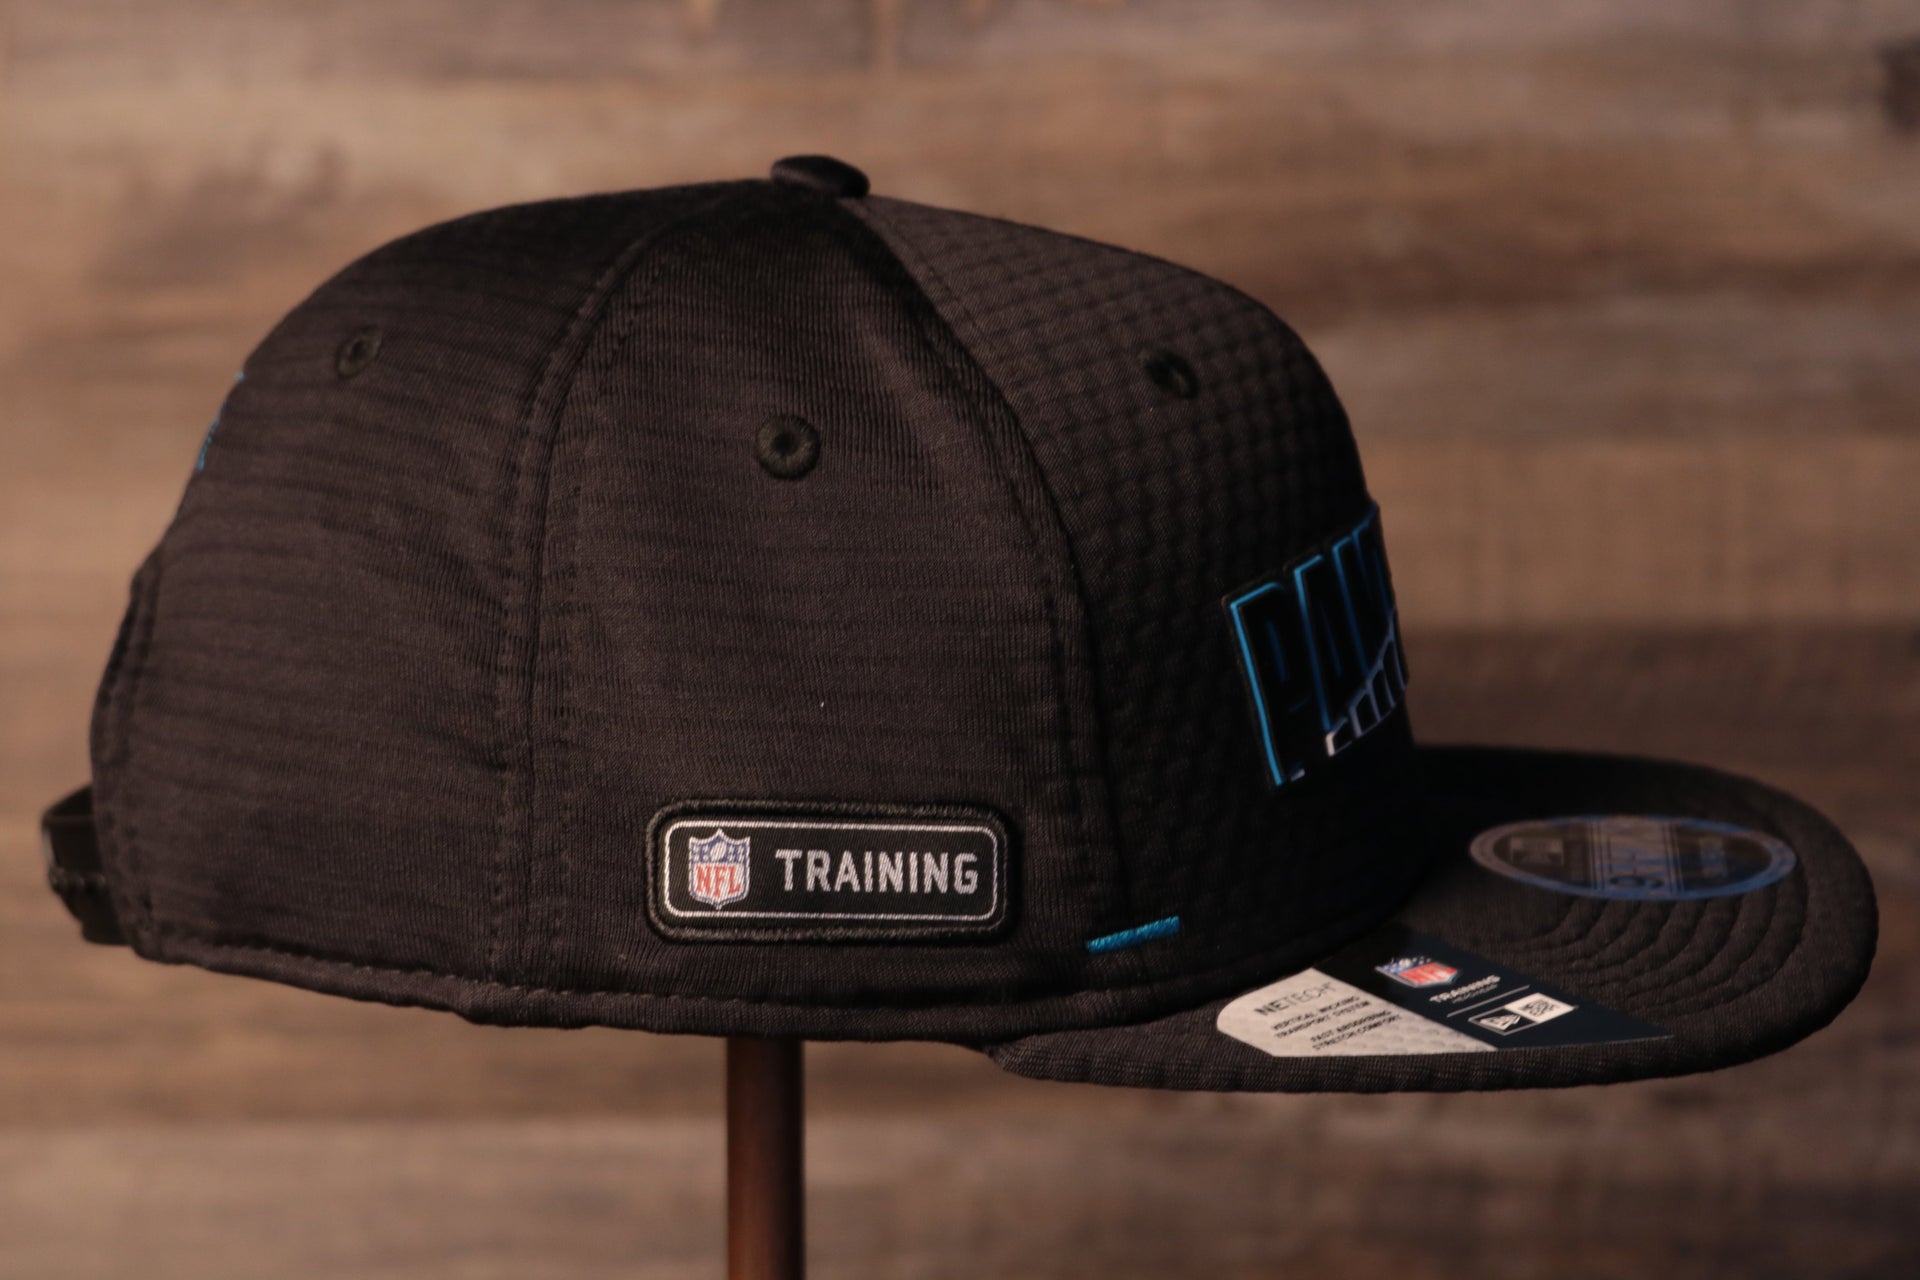 The wearers right side has the nfl training camp logo Panthers 2020 Training Camp Snapback Hat | Carolina Panthers 2020 On-Field Black Training Camp Snap Cap